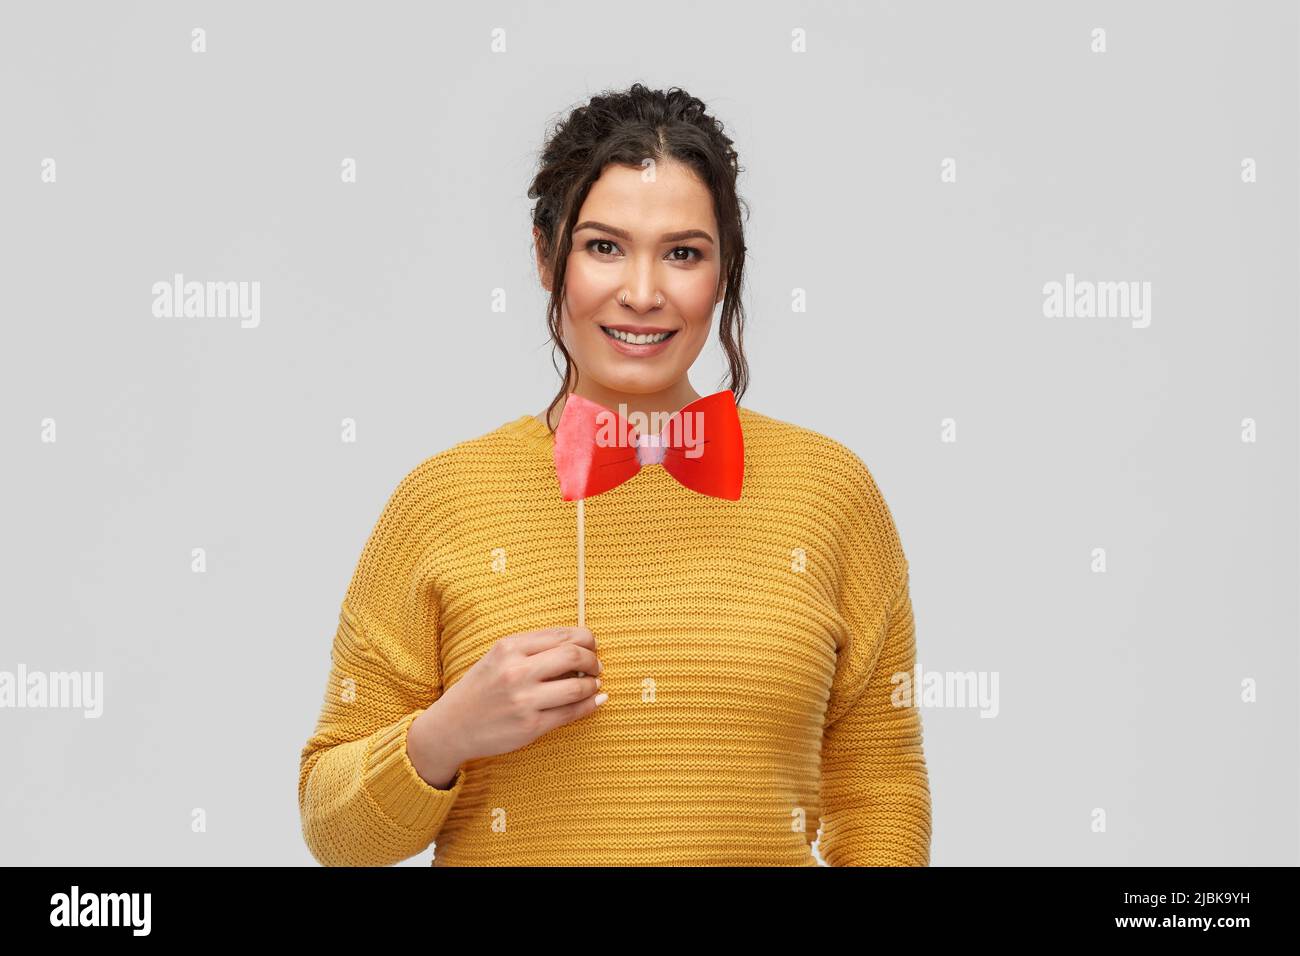 happy young woman with big red bowtie party prop Stock Photo